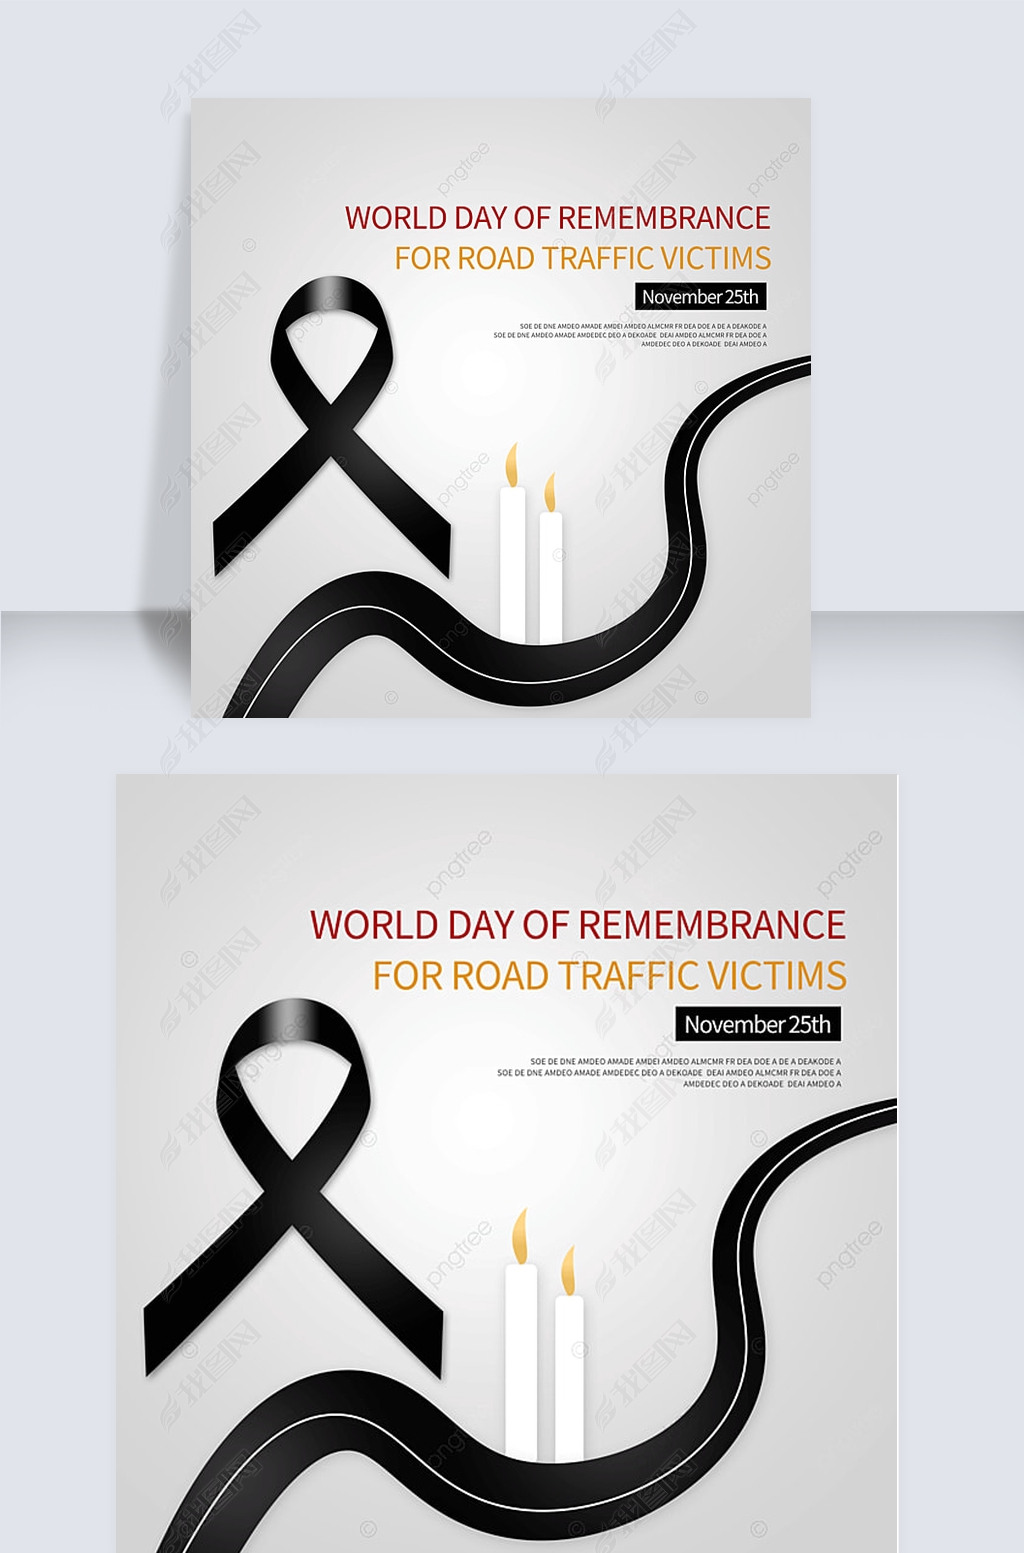 world day of remembrance for road traffic victims罻ýģ